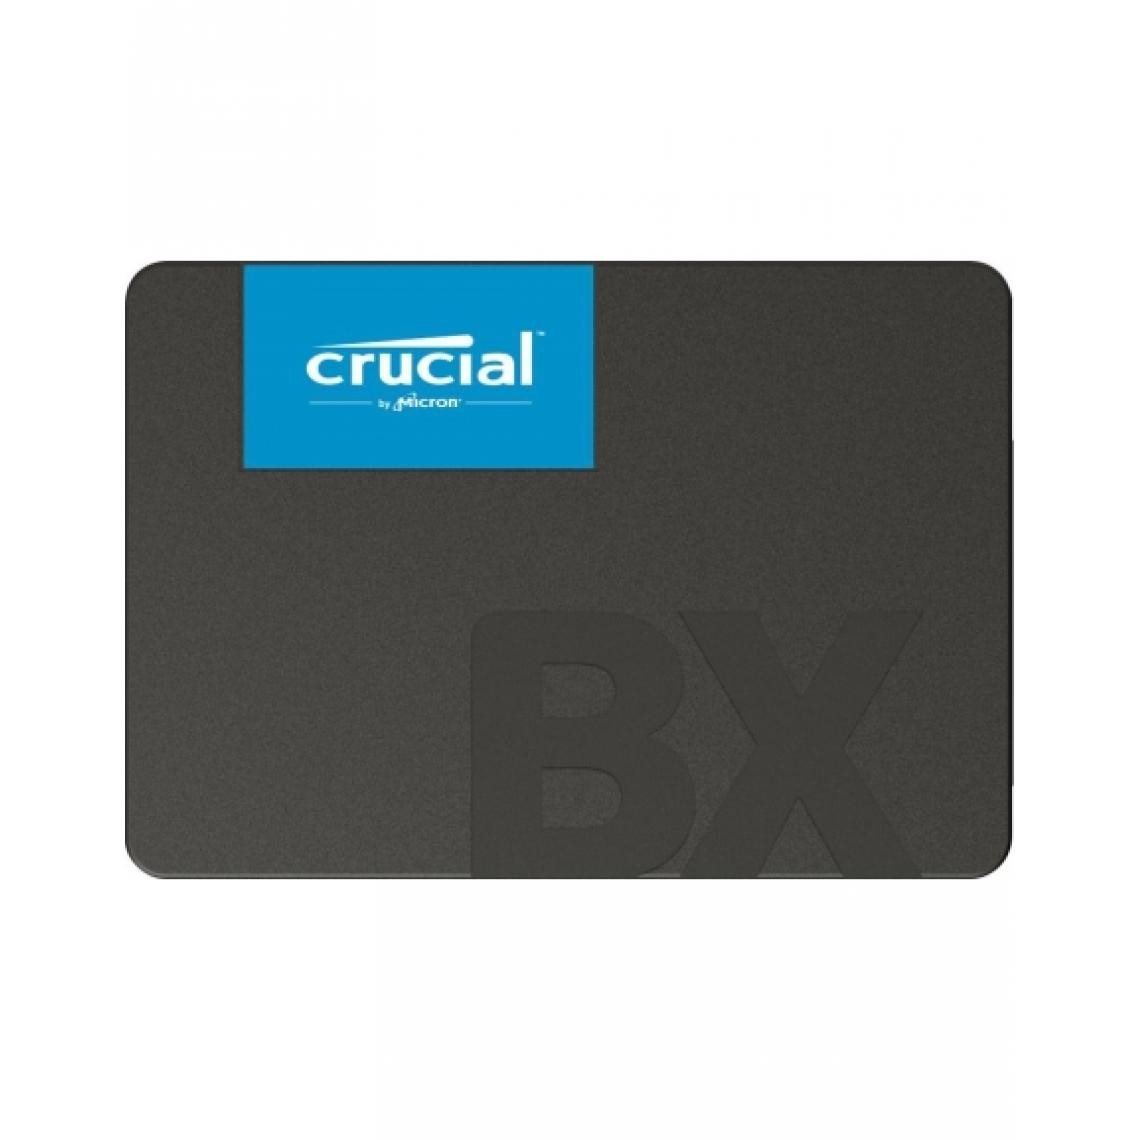 Crucial - BX500 2 5 pouces SSD - 480 GB - SSD Interne